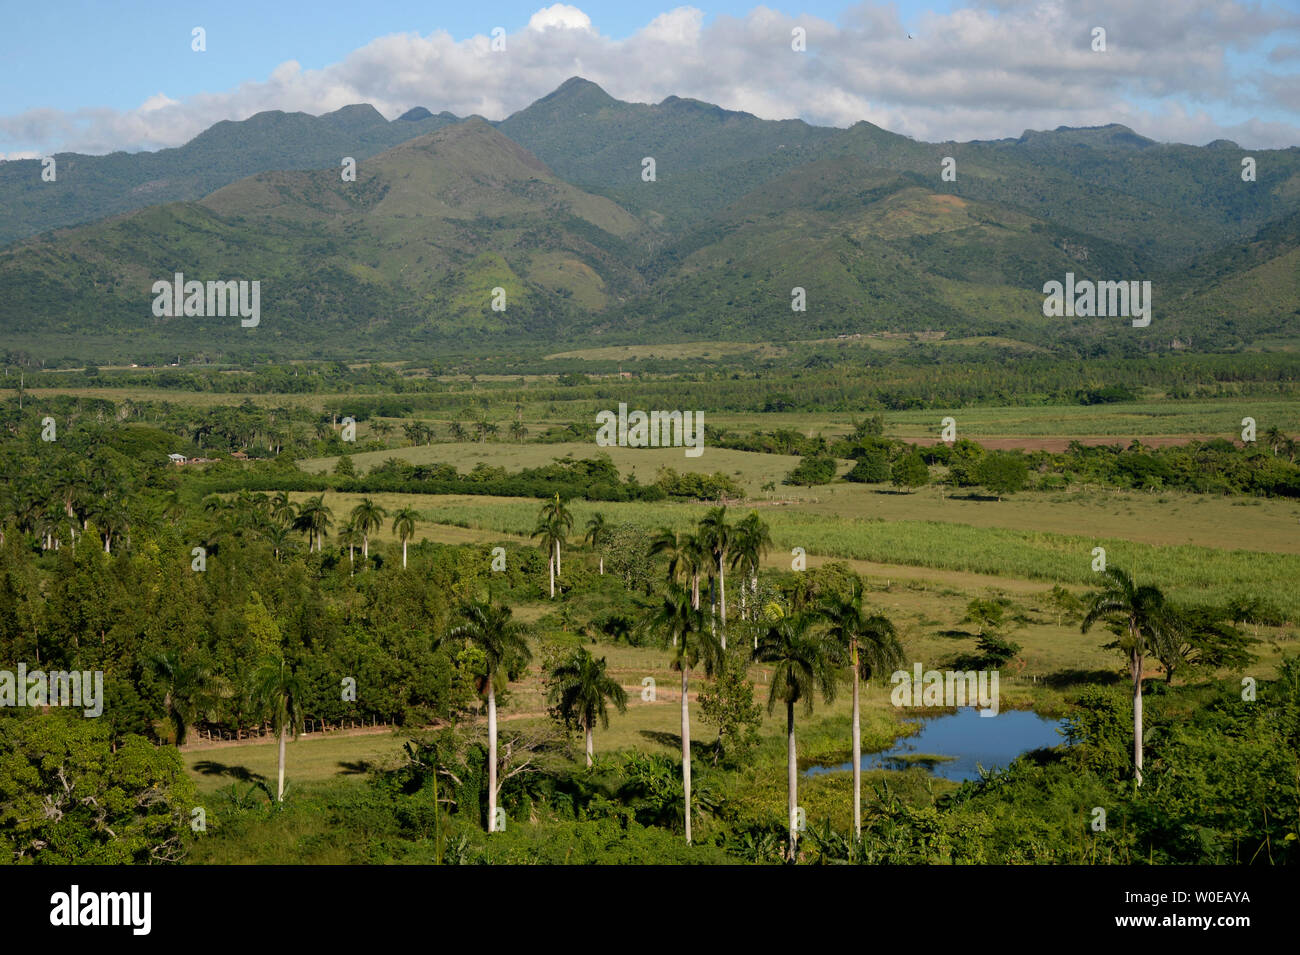 cuba, Trinidad area, view on a landscape made of mountains and palm trees, the Ingenios valley Stock Photo